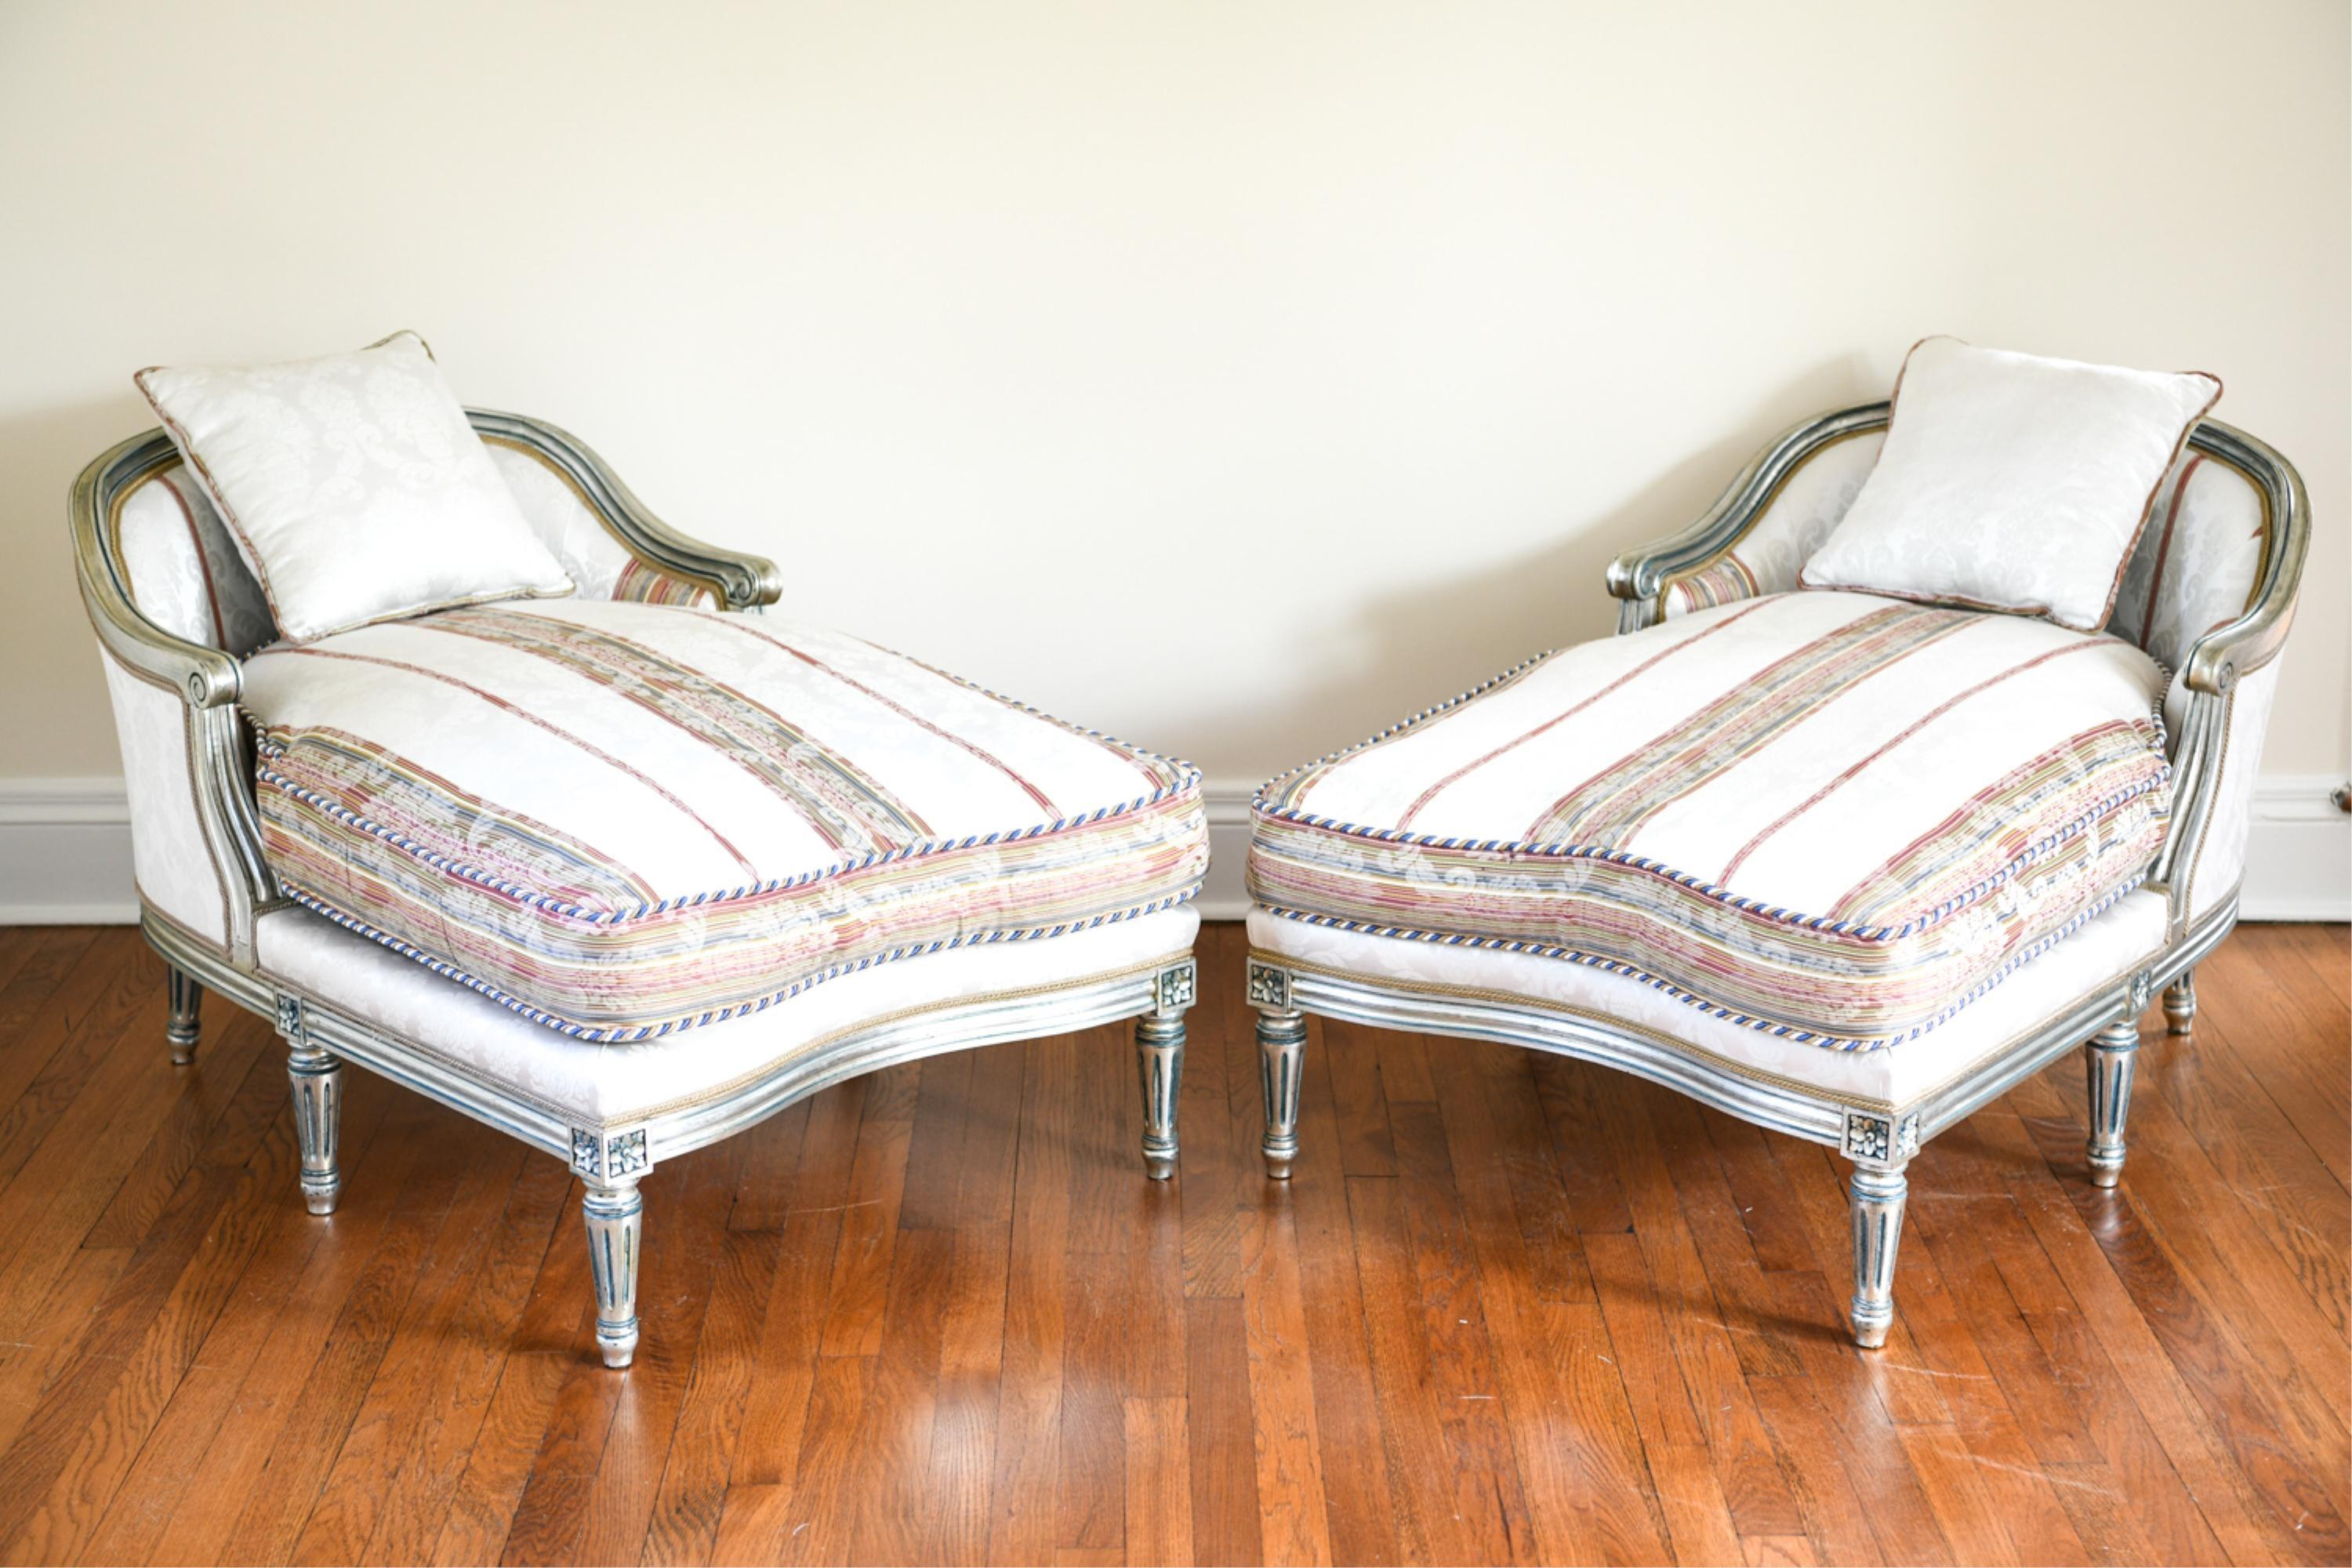 Jansen Inspired, Hollywood Regency, Chaise Louges, Painted Wood, Silver, 1950s For Sale 1